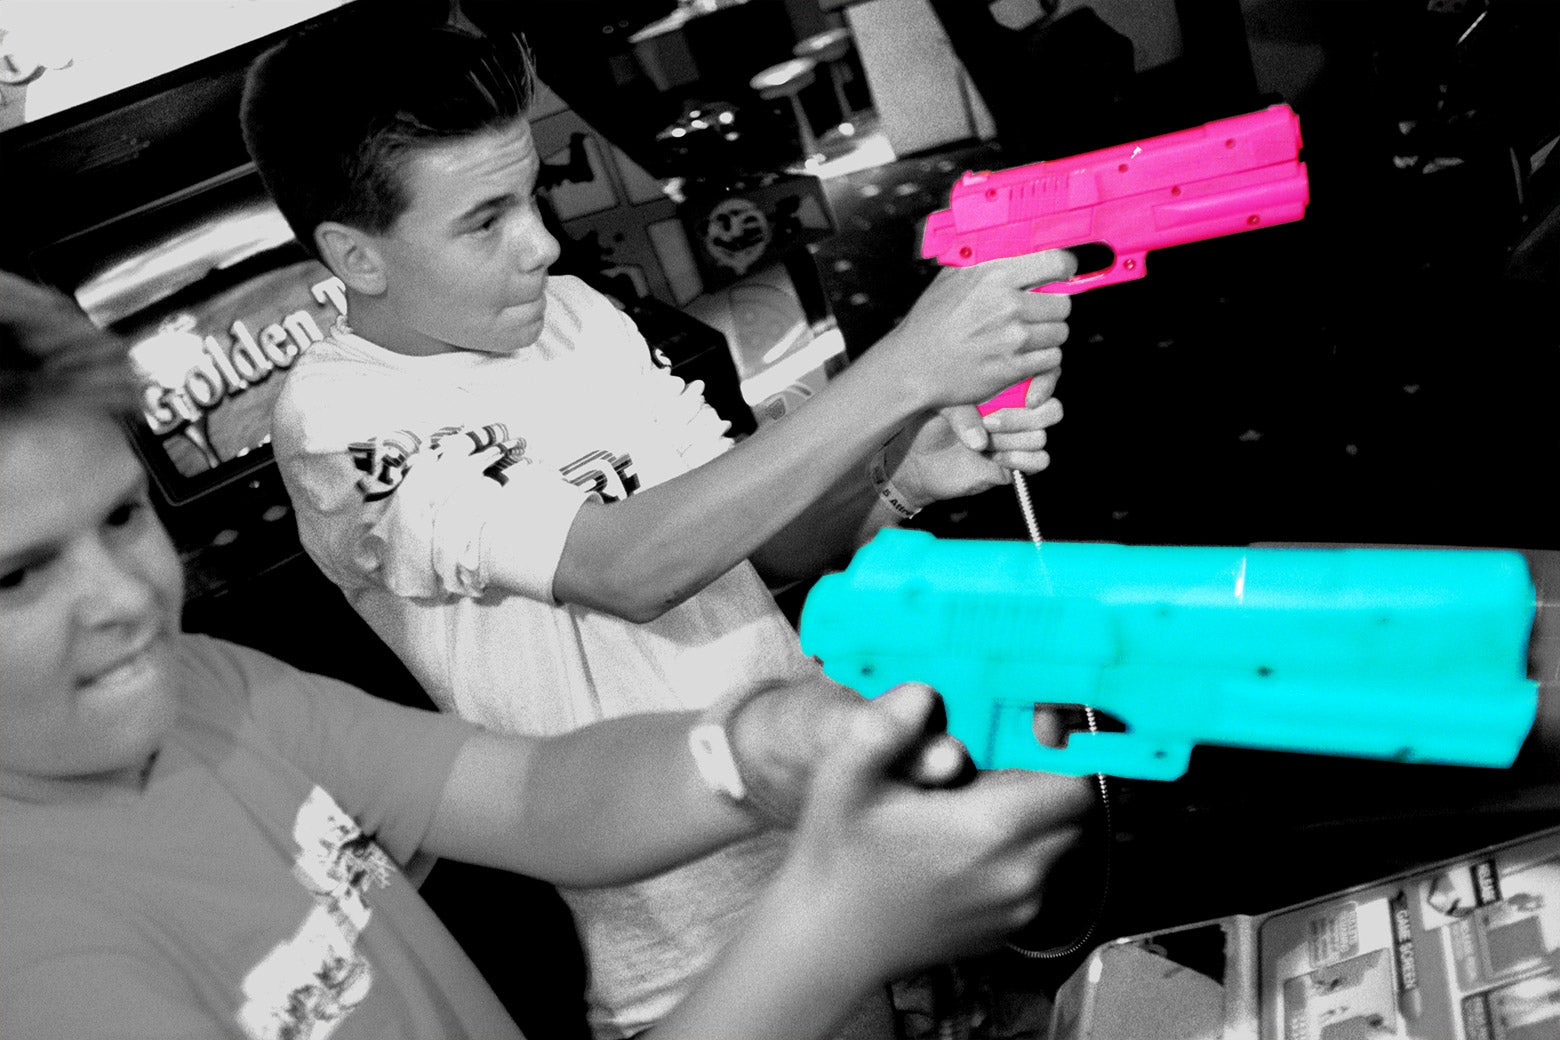 Kids play with toy guns at arcade.